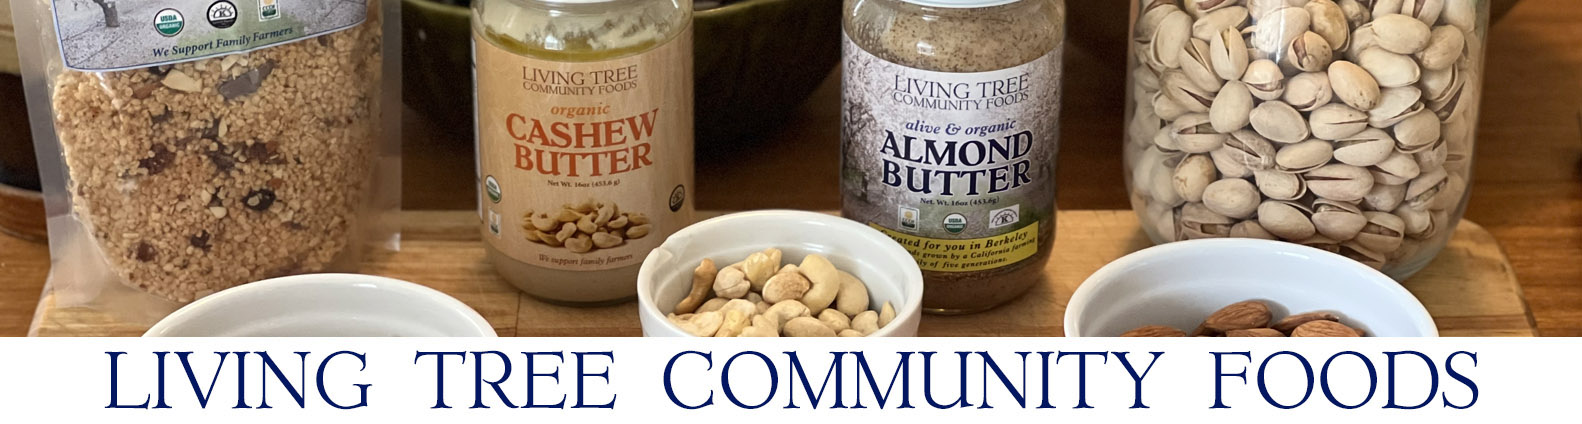 Nuts Nut Butters and Muesli Newsletter Header